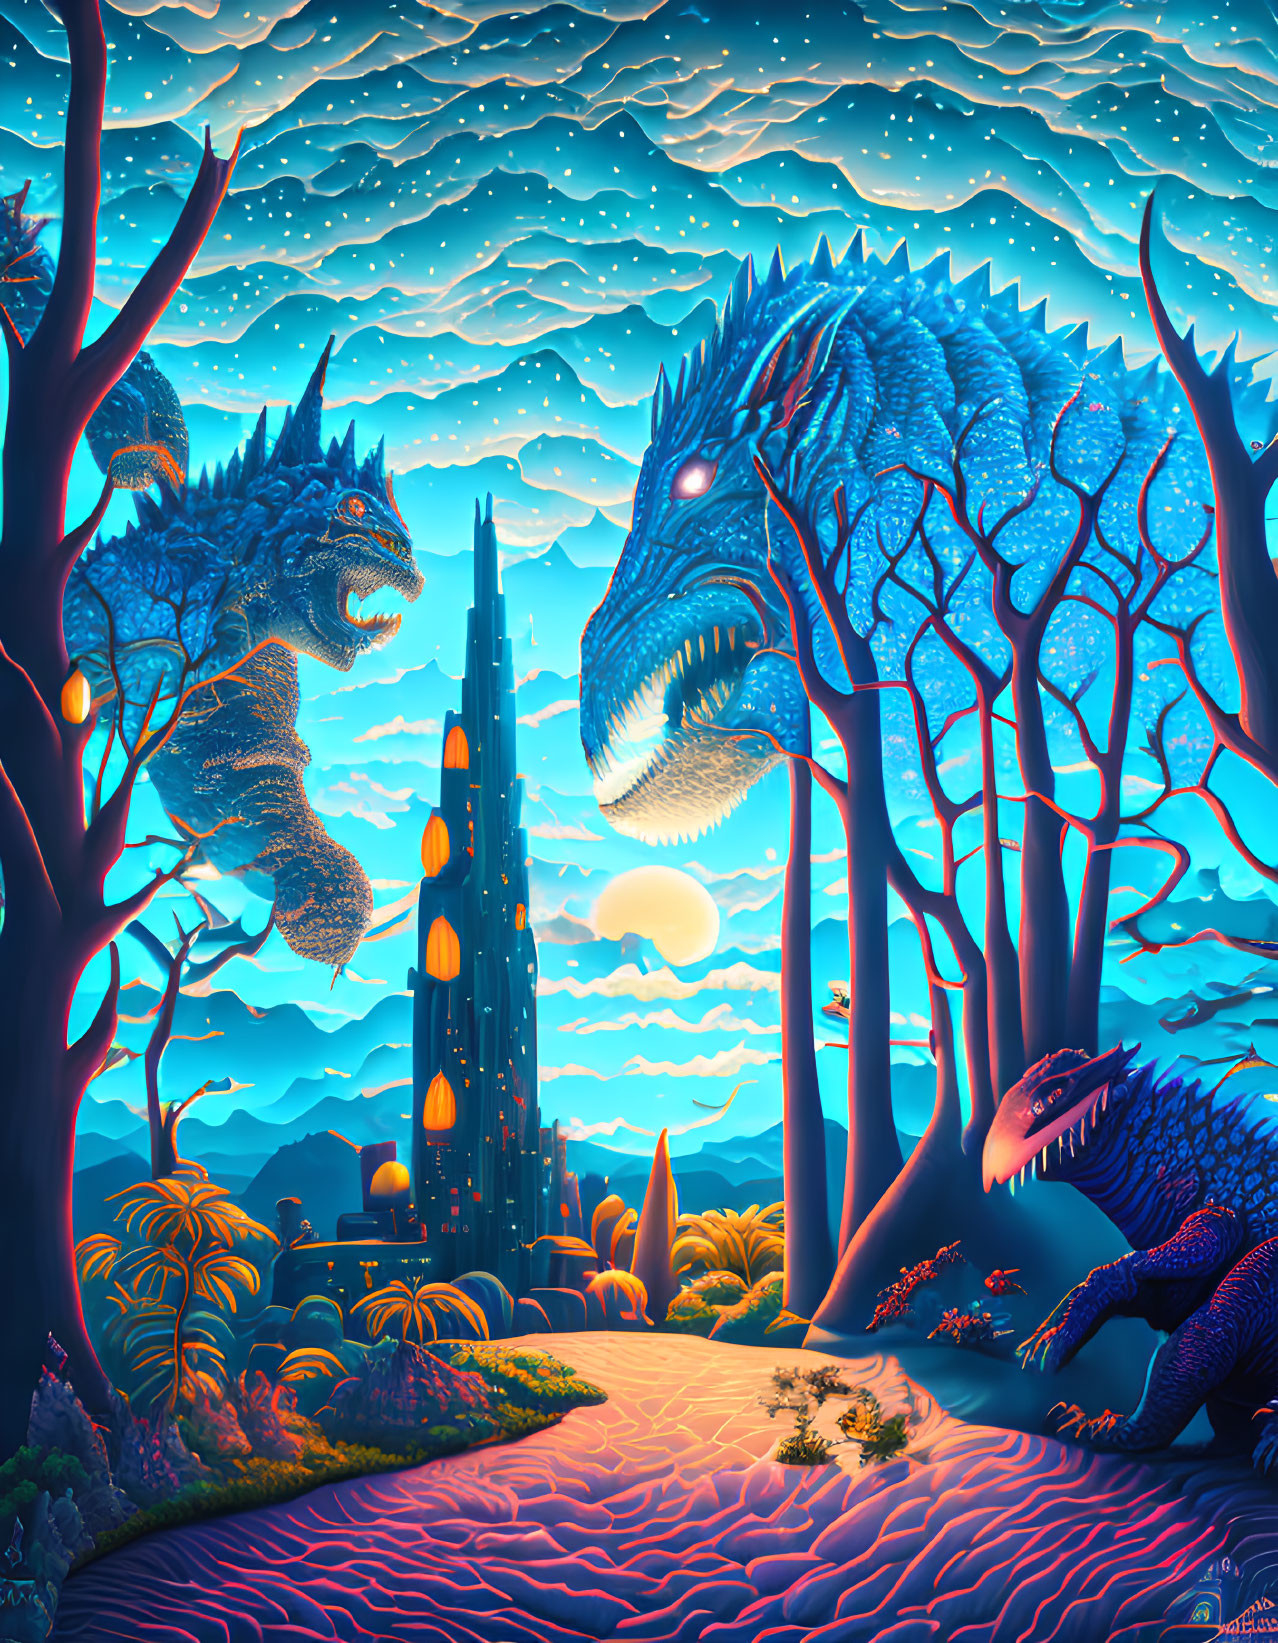 Three dragons in surreal landscape with glowing tower under moonlit night